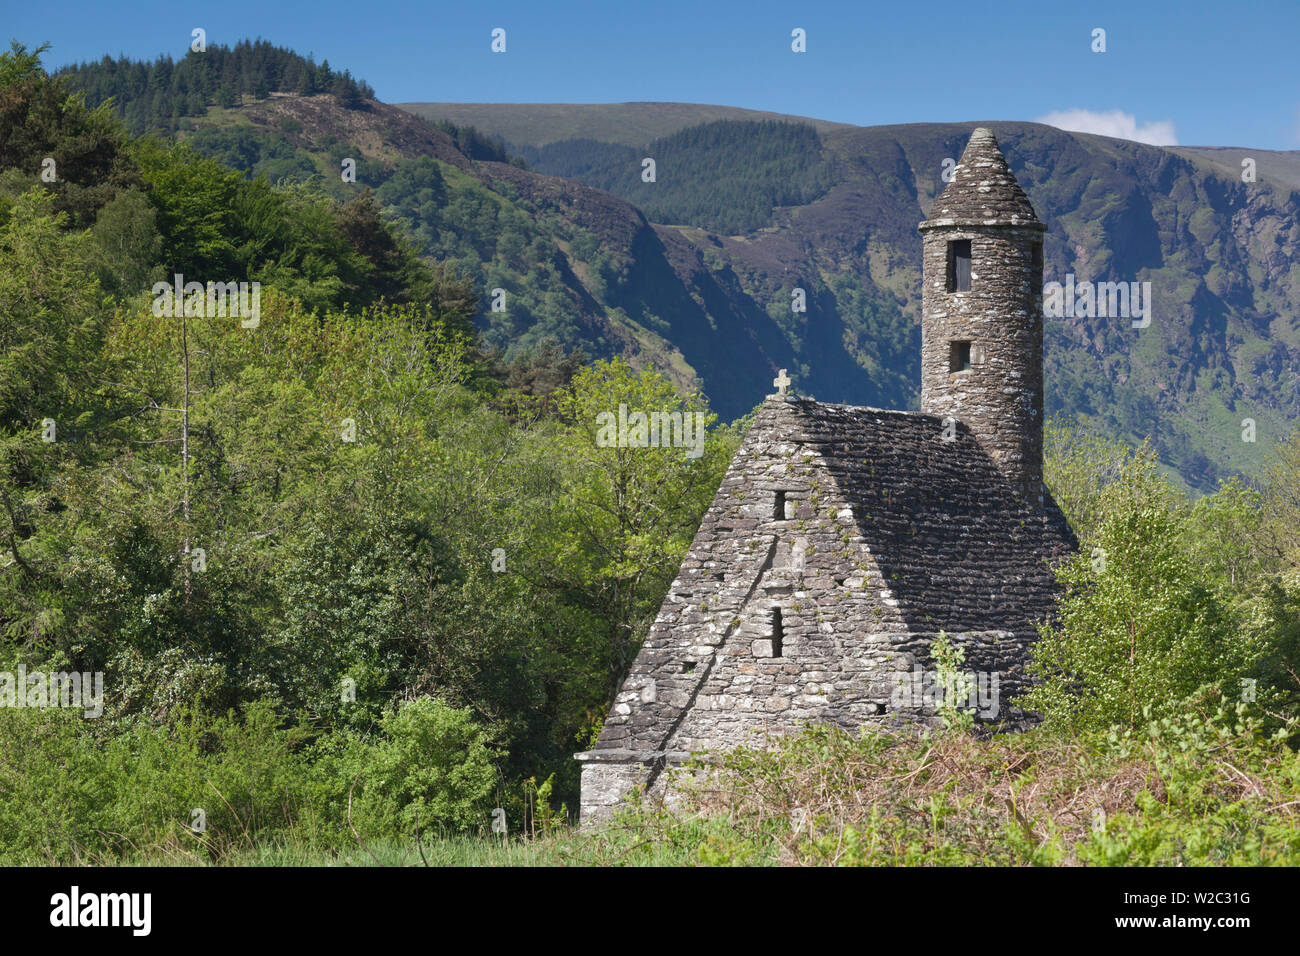 Ireland, County Wicklow, Glendalough, ancient monastic settlement started by St. Kevin, St. Kevin's Kitchen Church Stock Photo